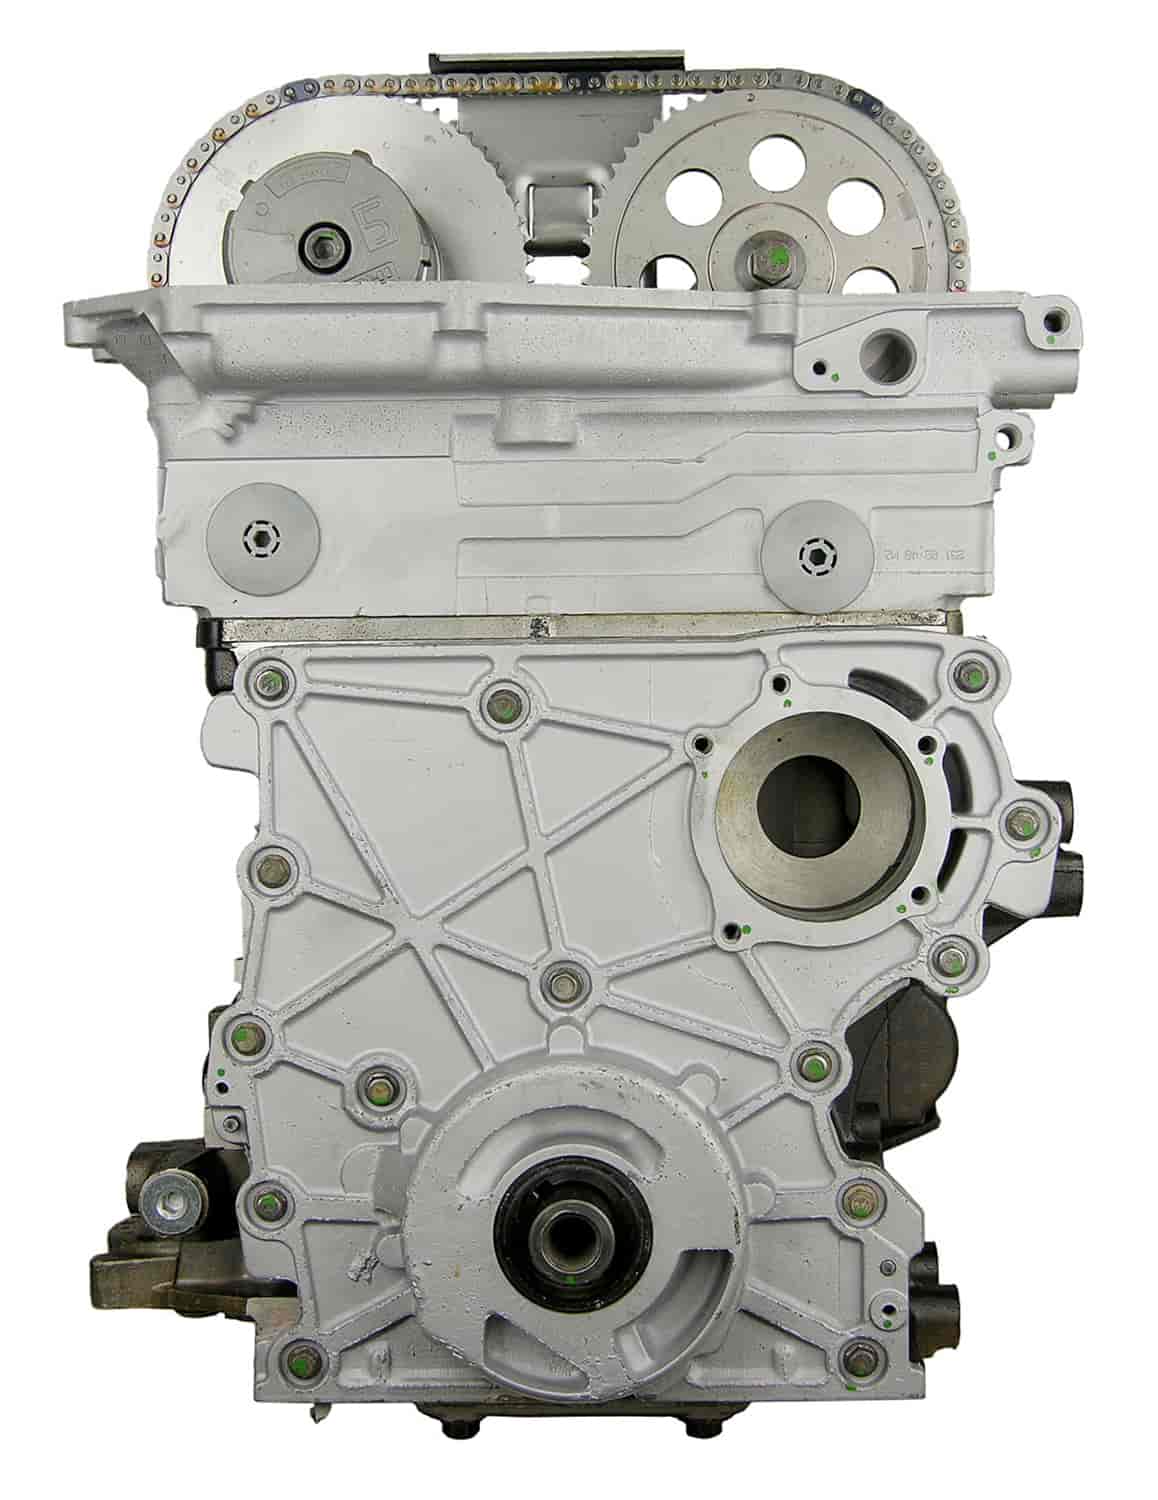 Remanufactured Crate Engine for 2004-2005 Chevy Colorado & GMC Canyon with 3.5L L5